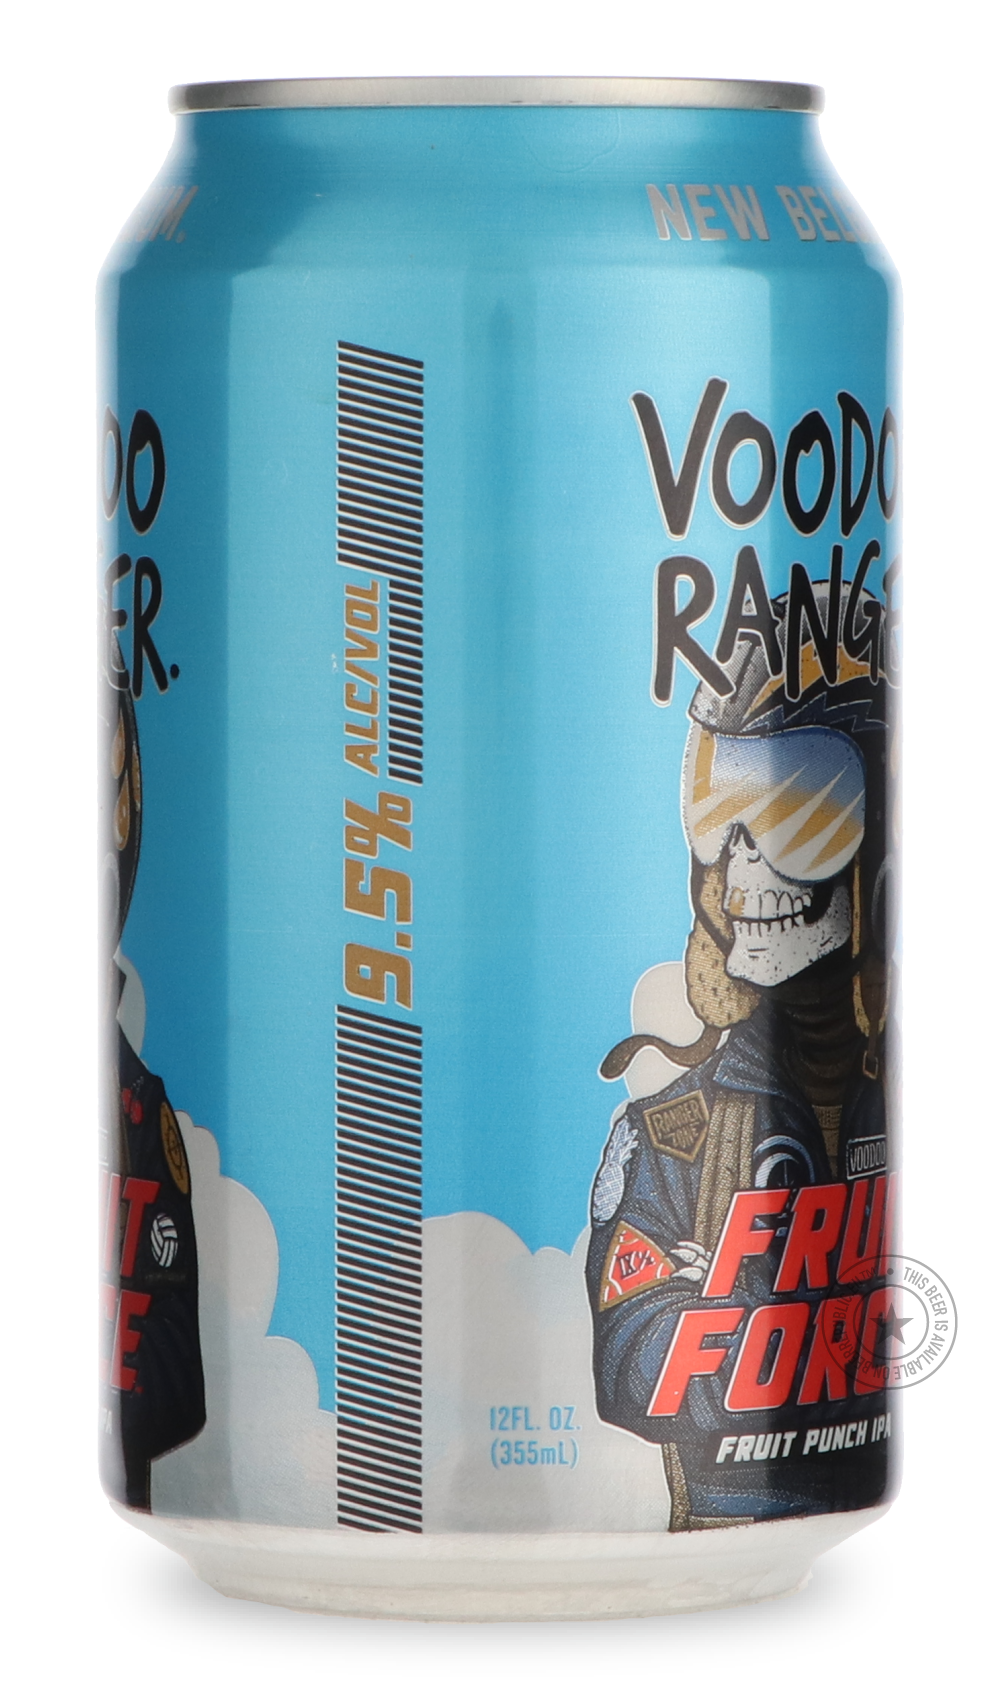 -New Belgium- Voodoo Ranger Fruit Force IPA-IPA- Only @ Beer Republic - The best online beer store for American & Canadian craft beer - Buy beer online from the USA and Canada - Bier online kopen - Amerikaans bier kopen - Craft beer store - Craft beer kopen - Amerikanisch bier kaufen - Bier online kaufen - Acheter biere online - IPA - Stout - Porter - New England IPA - Hazy IPA - Imperial Stout - Barrel Aged - Barrel Aged Imperial Stout - Brown - Dark beer - Blond - Blonde - Pilsner - Lager - Wheat - Weizen